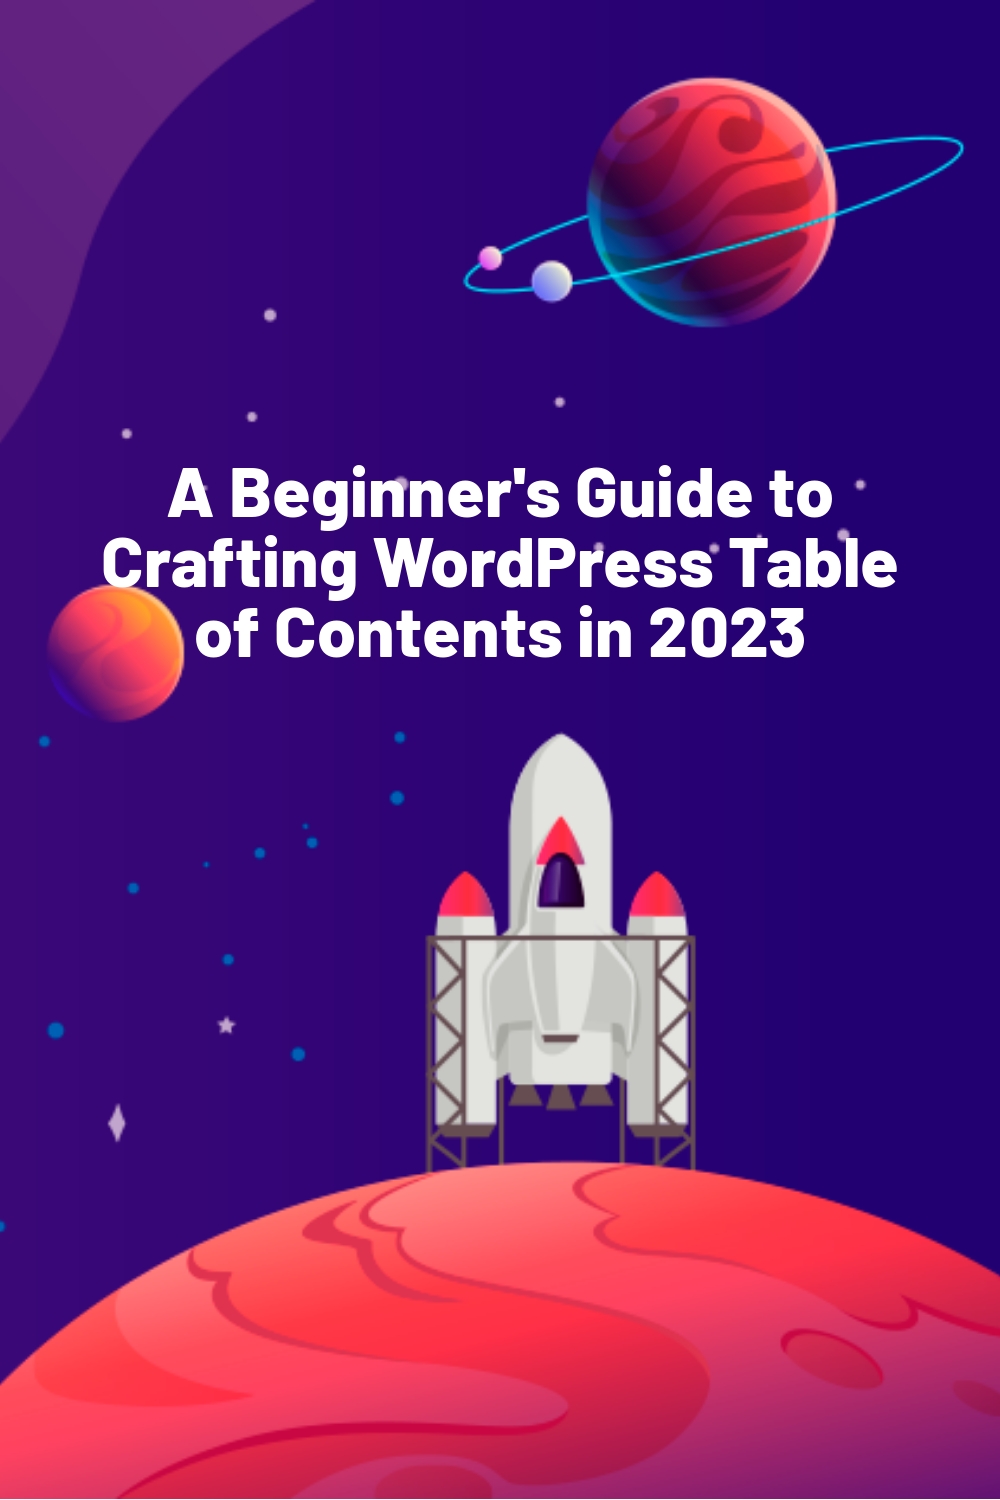 A Beginner’s Guide to Crafting WordPress Table of Contents in 2023